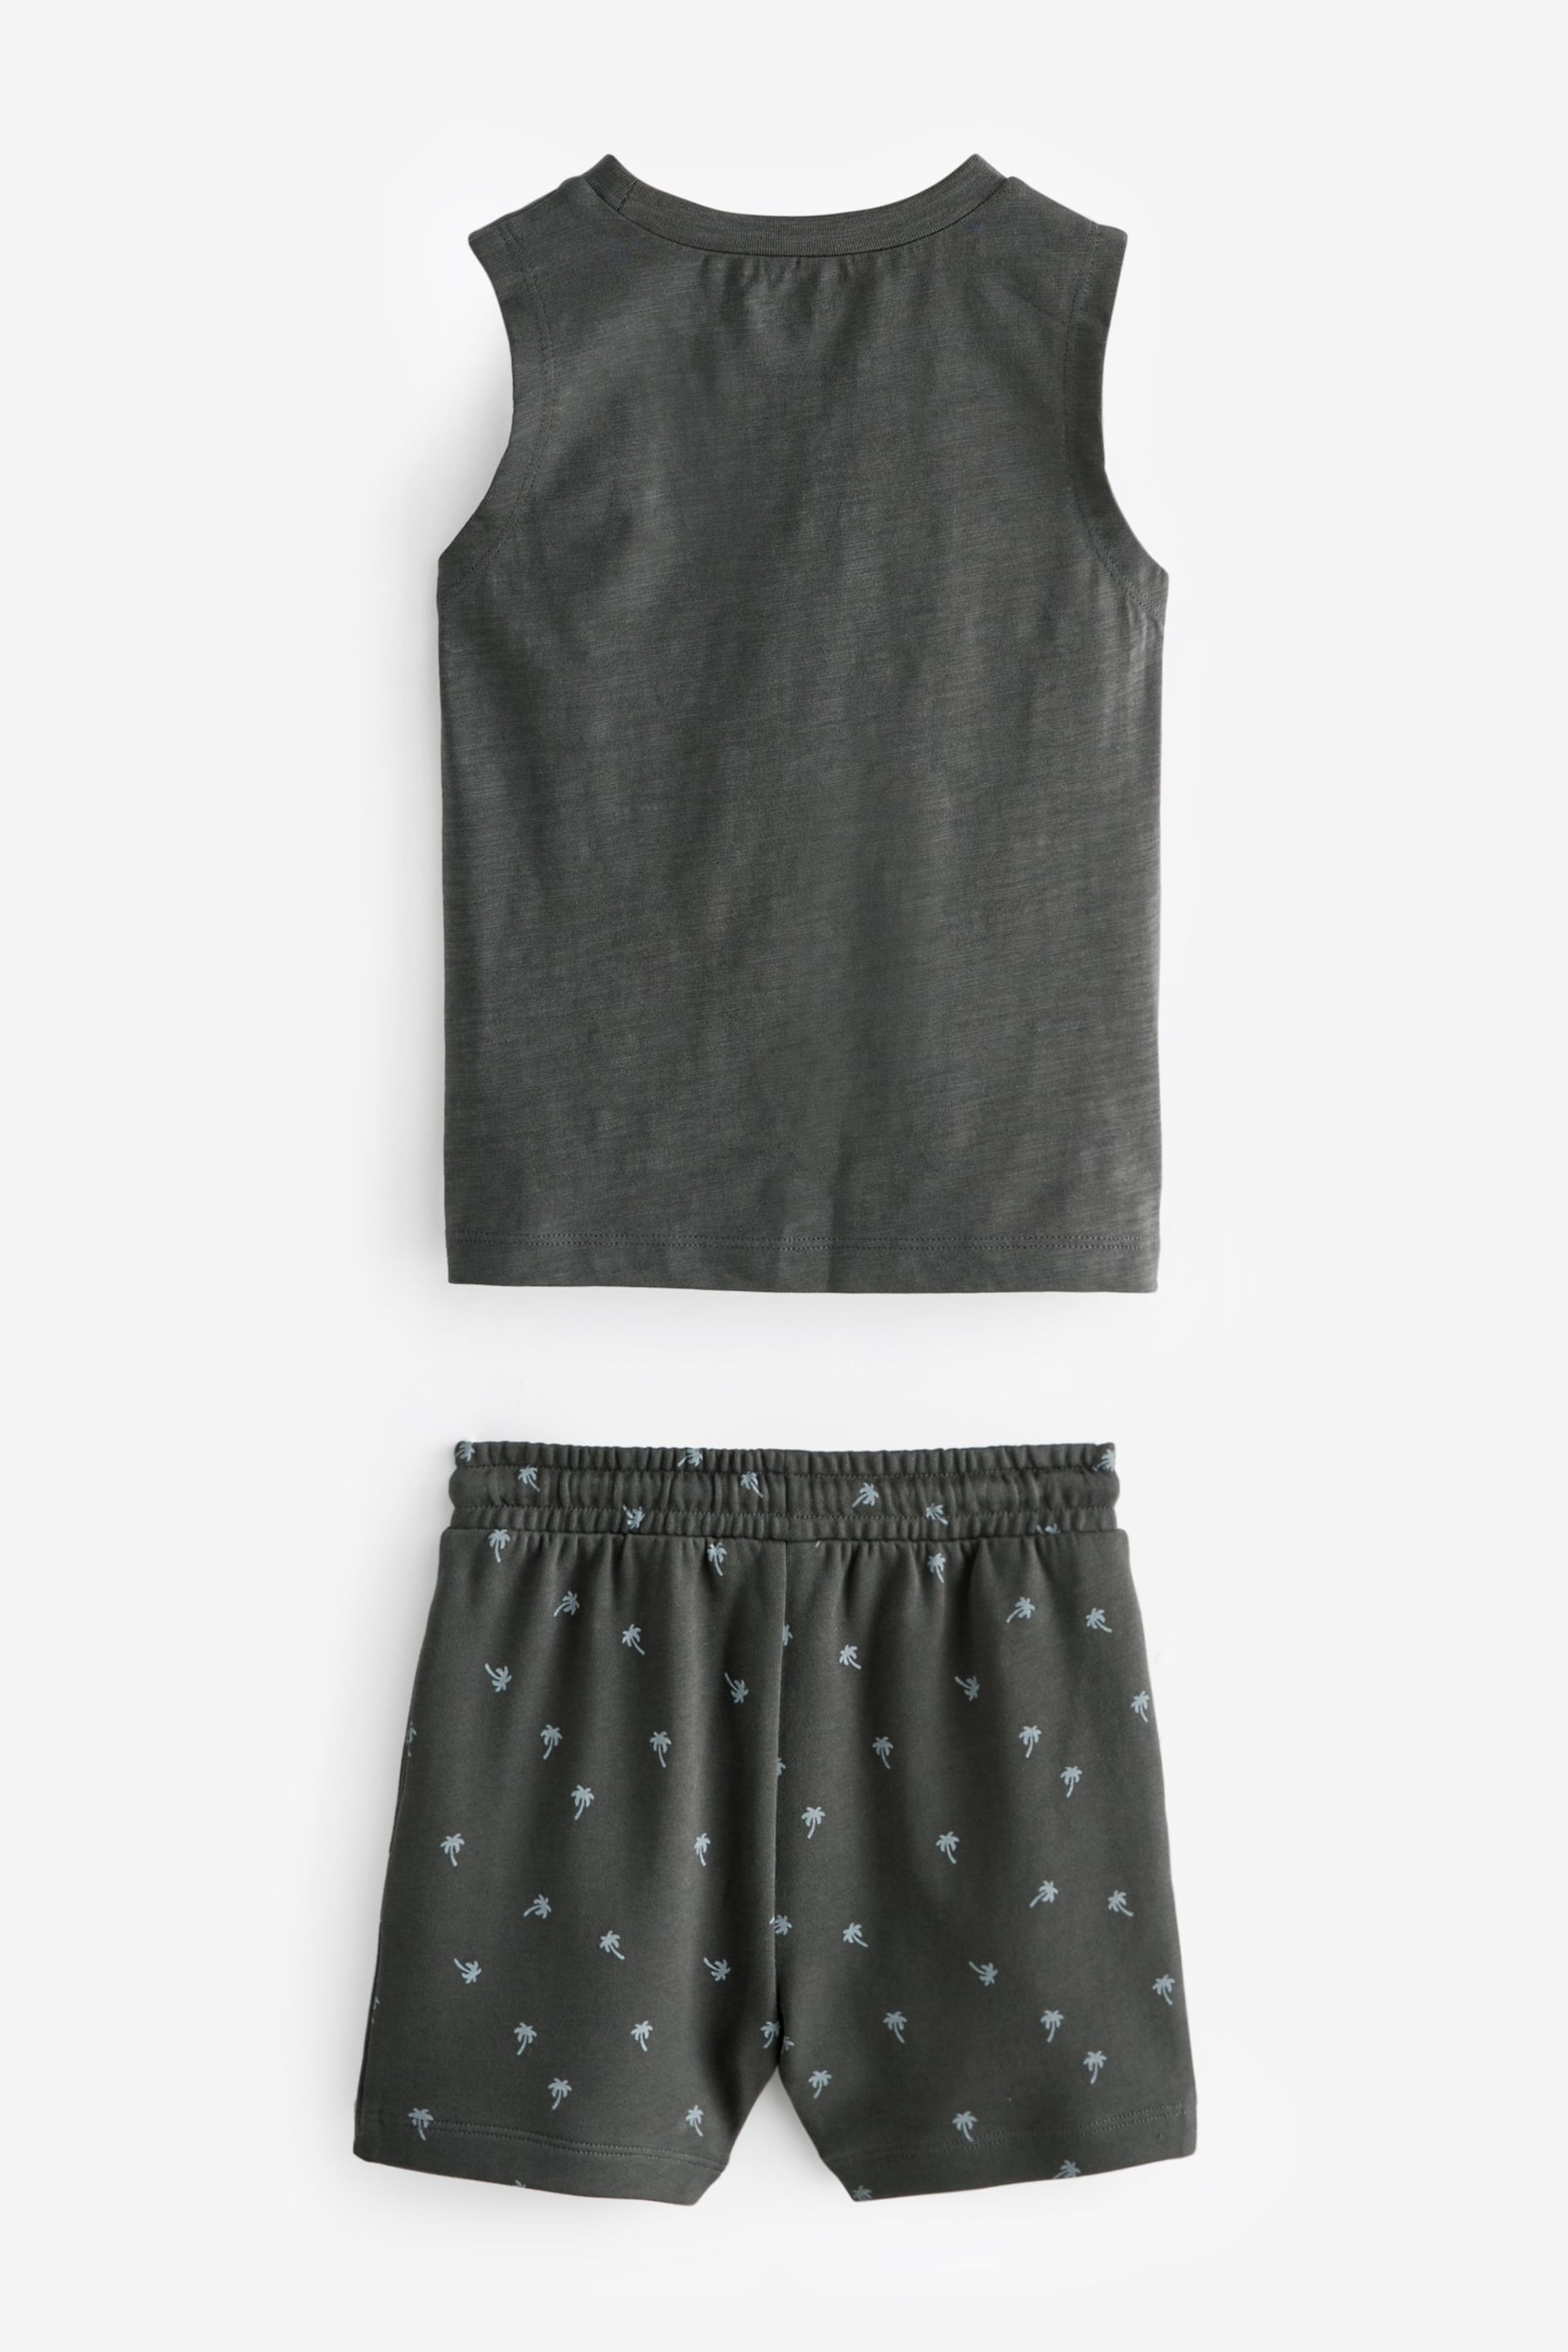 Charcoal Grey Vest and Shorts Set (3mths-7yrs) - Image 6 of 7